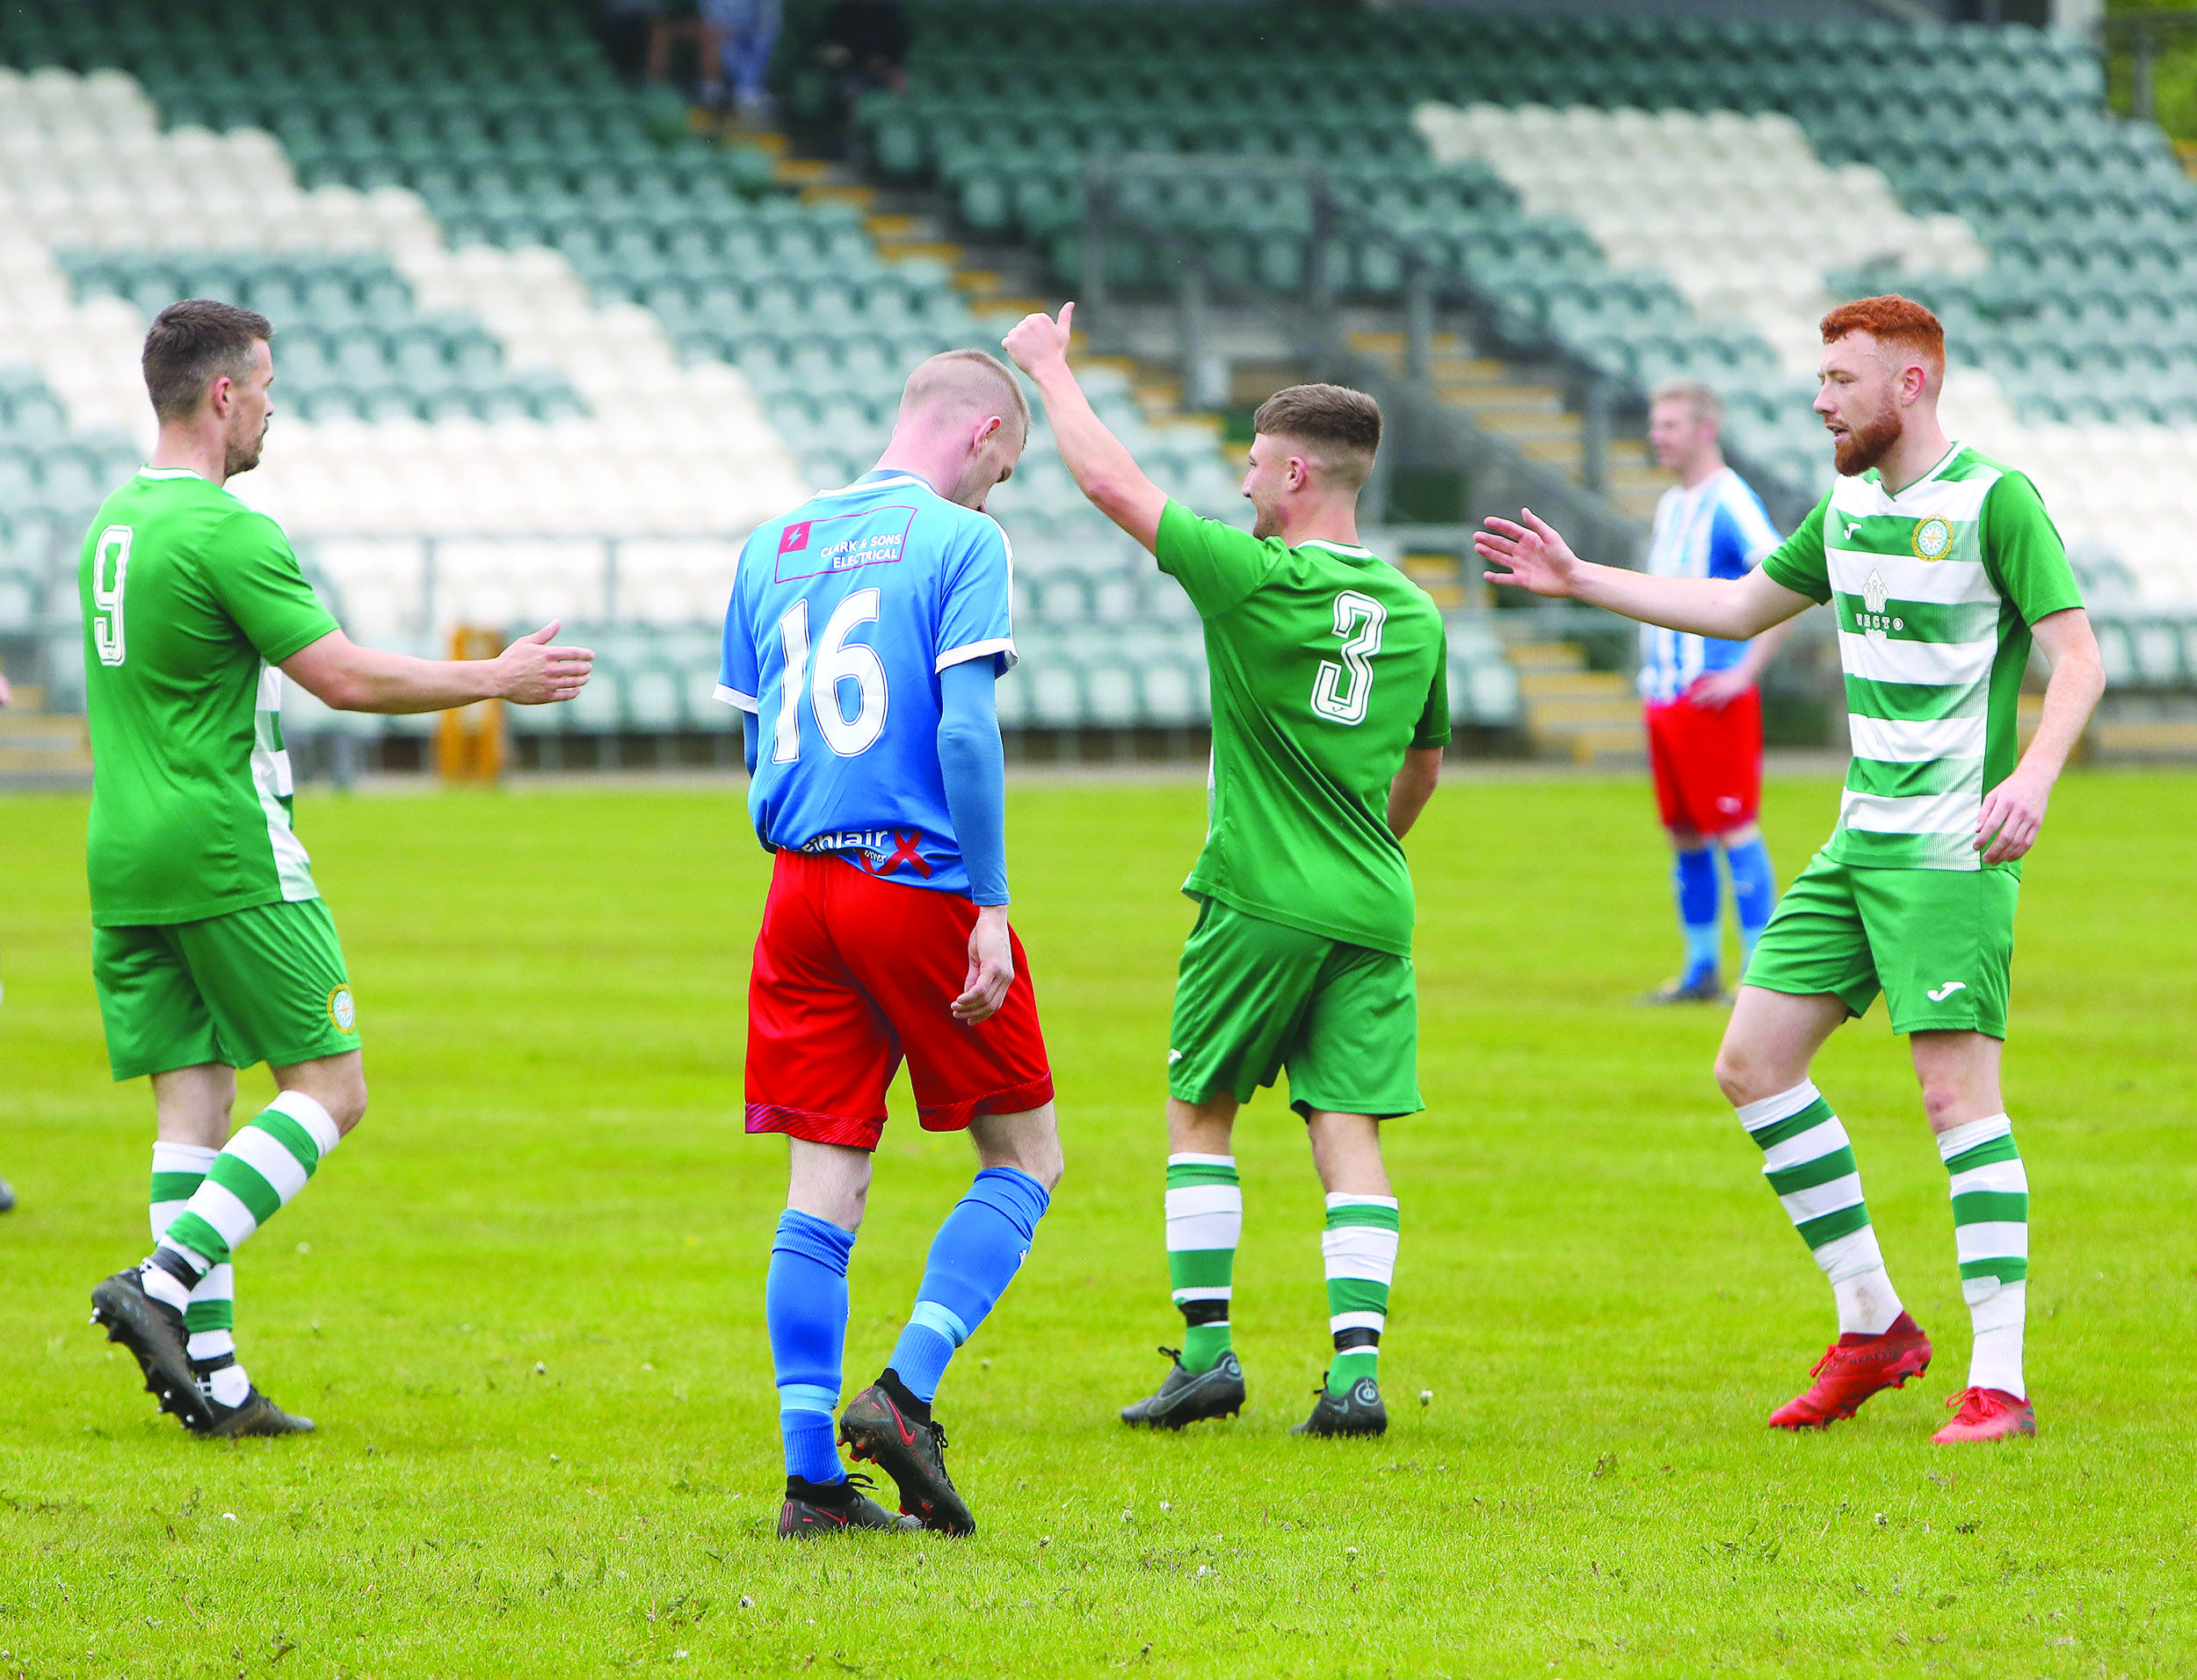 Donegal Celtic were 4-1 winners over Glebe Rangers on Saturday